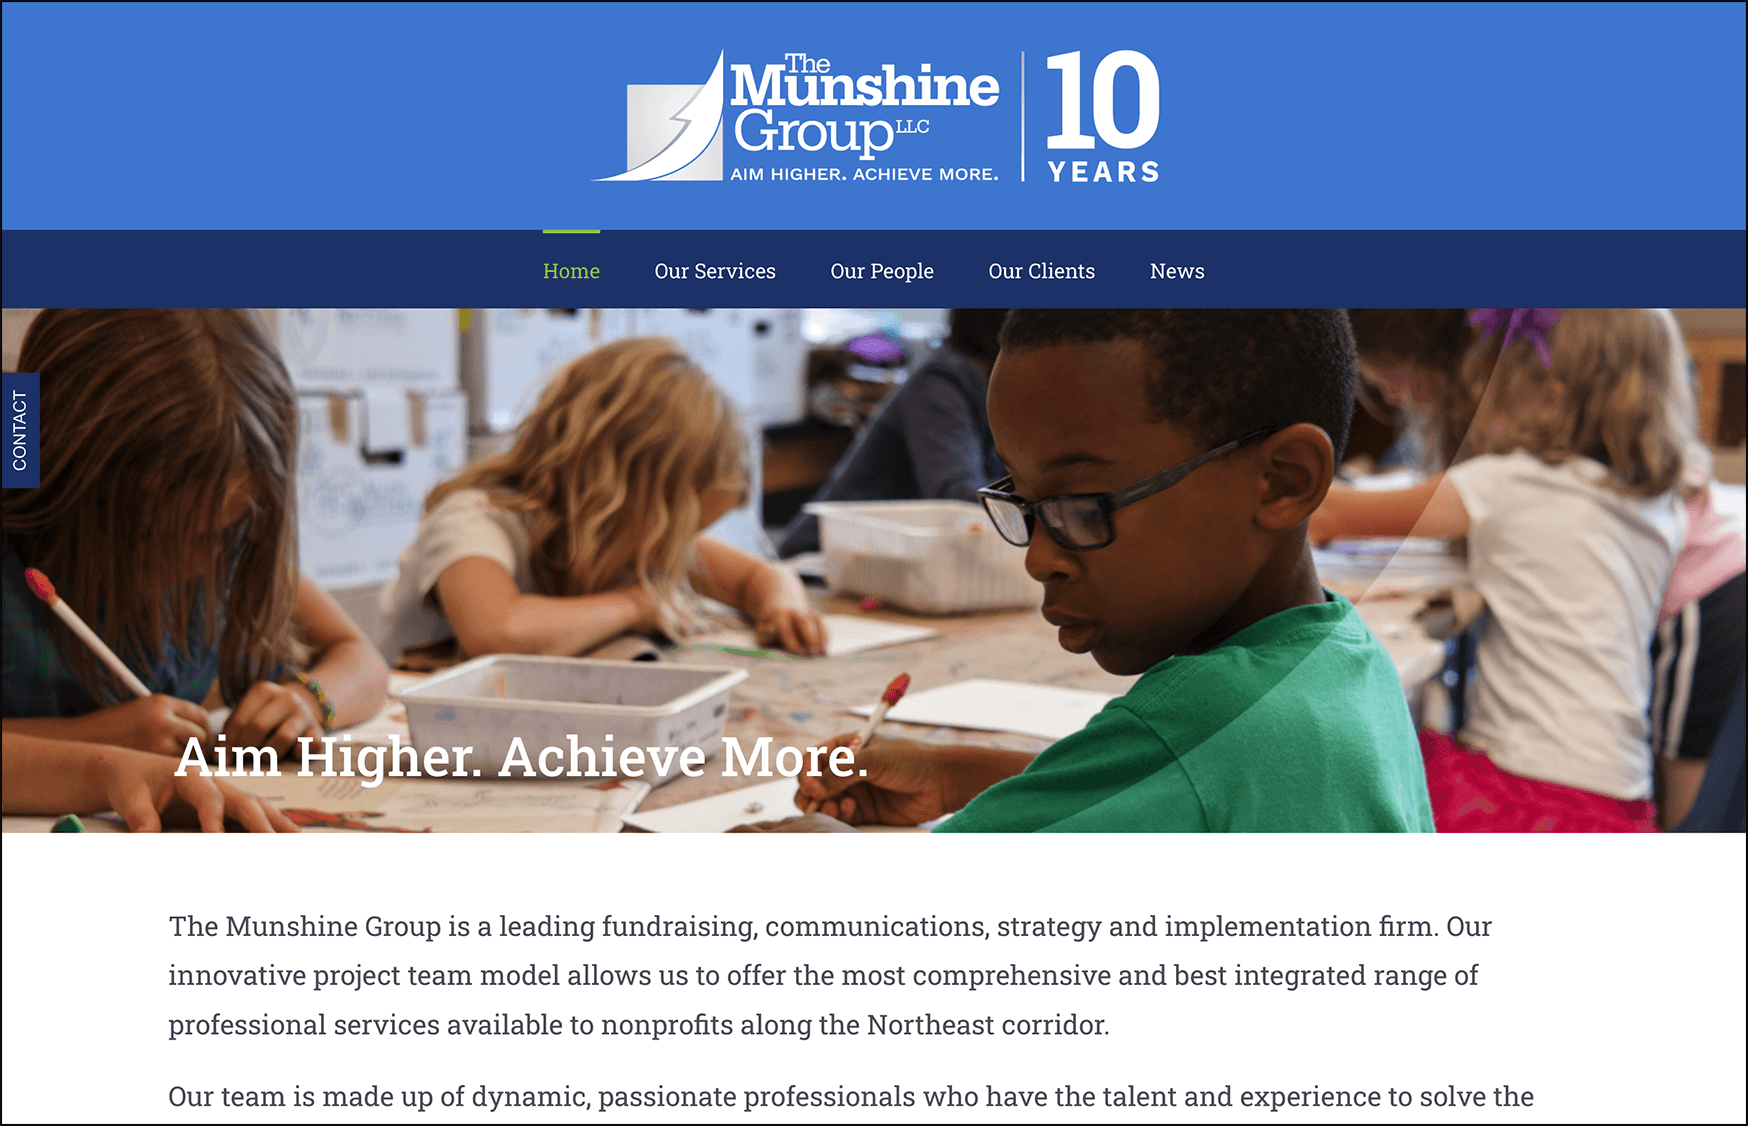 The Munshine Group is a top fundraising consulting firm. 